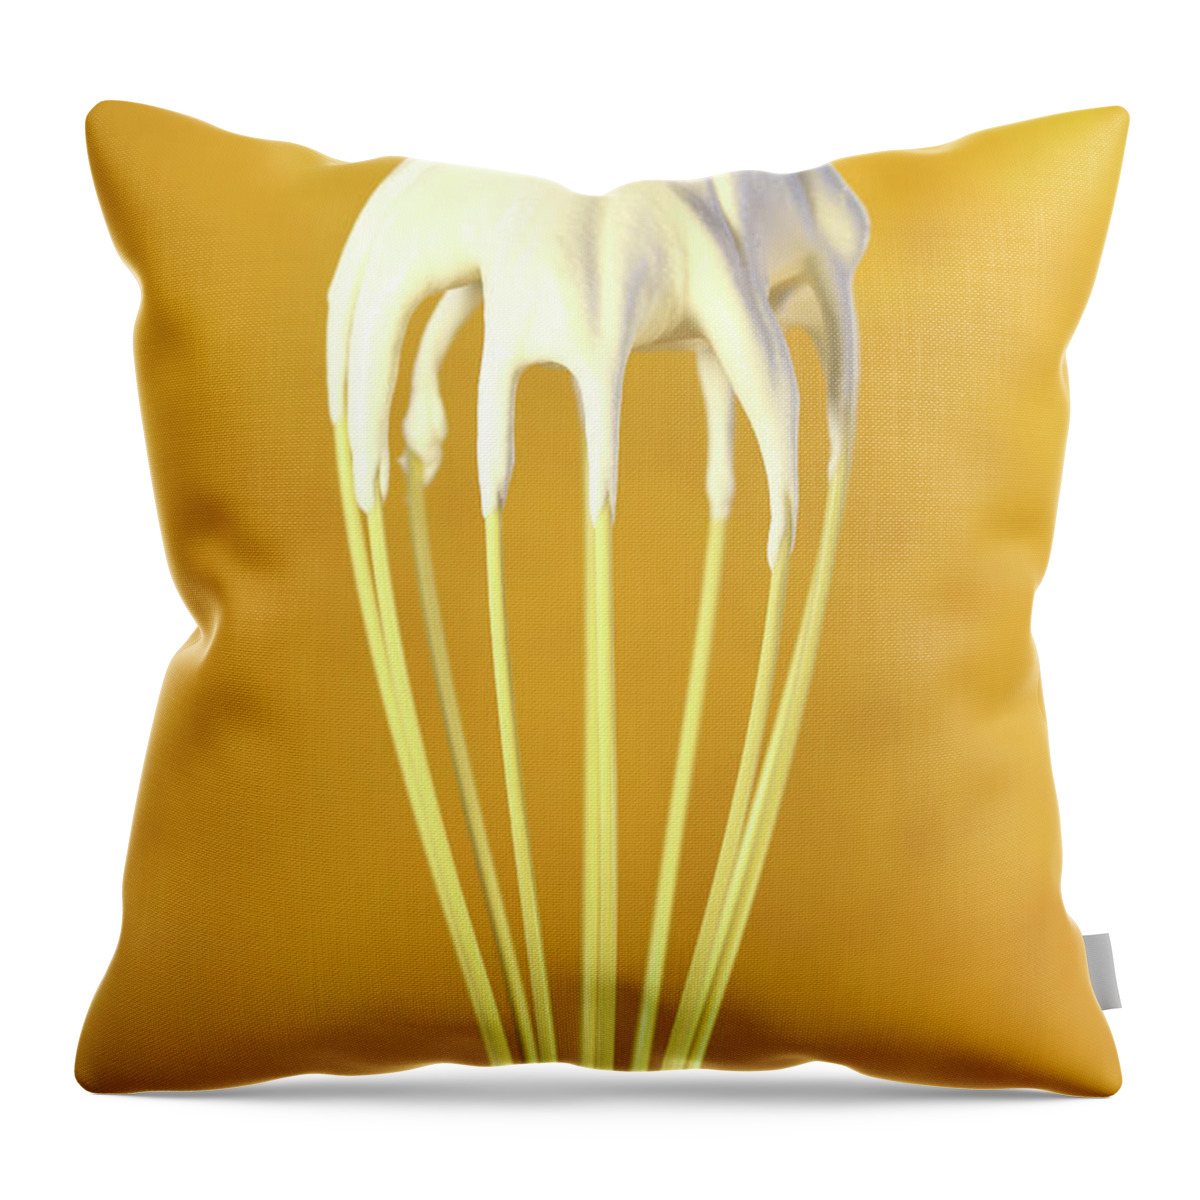 Kitchen Throw Pillow featuring the photograph Whisk with whip cream on top by Sandra Cunningham